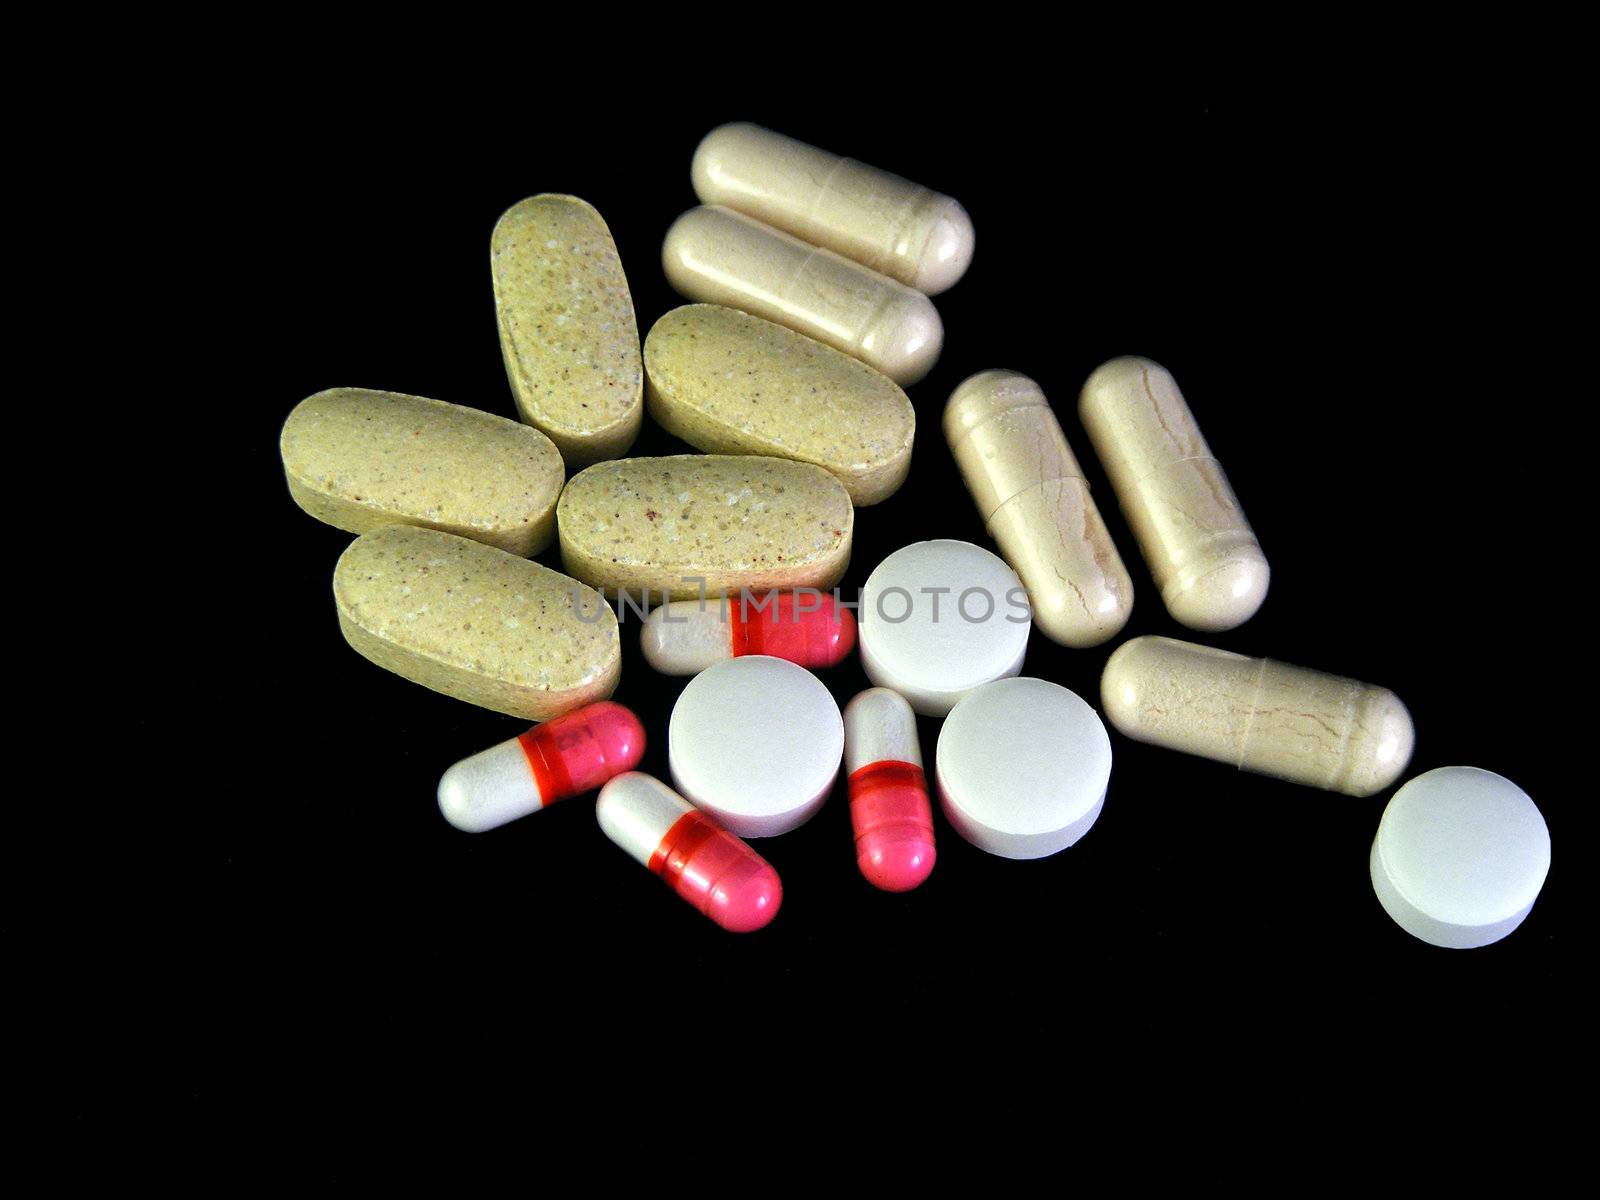 Several types of over-the-counter pills and capsules.